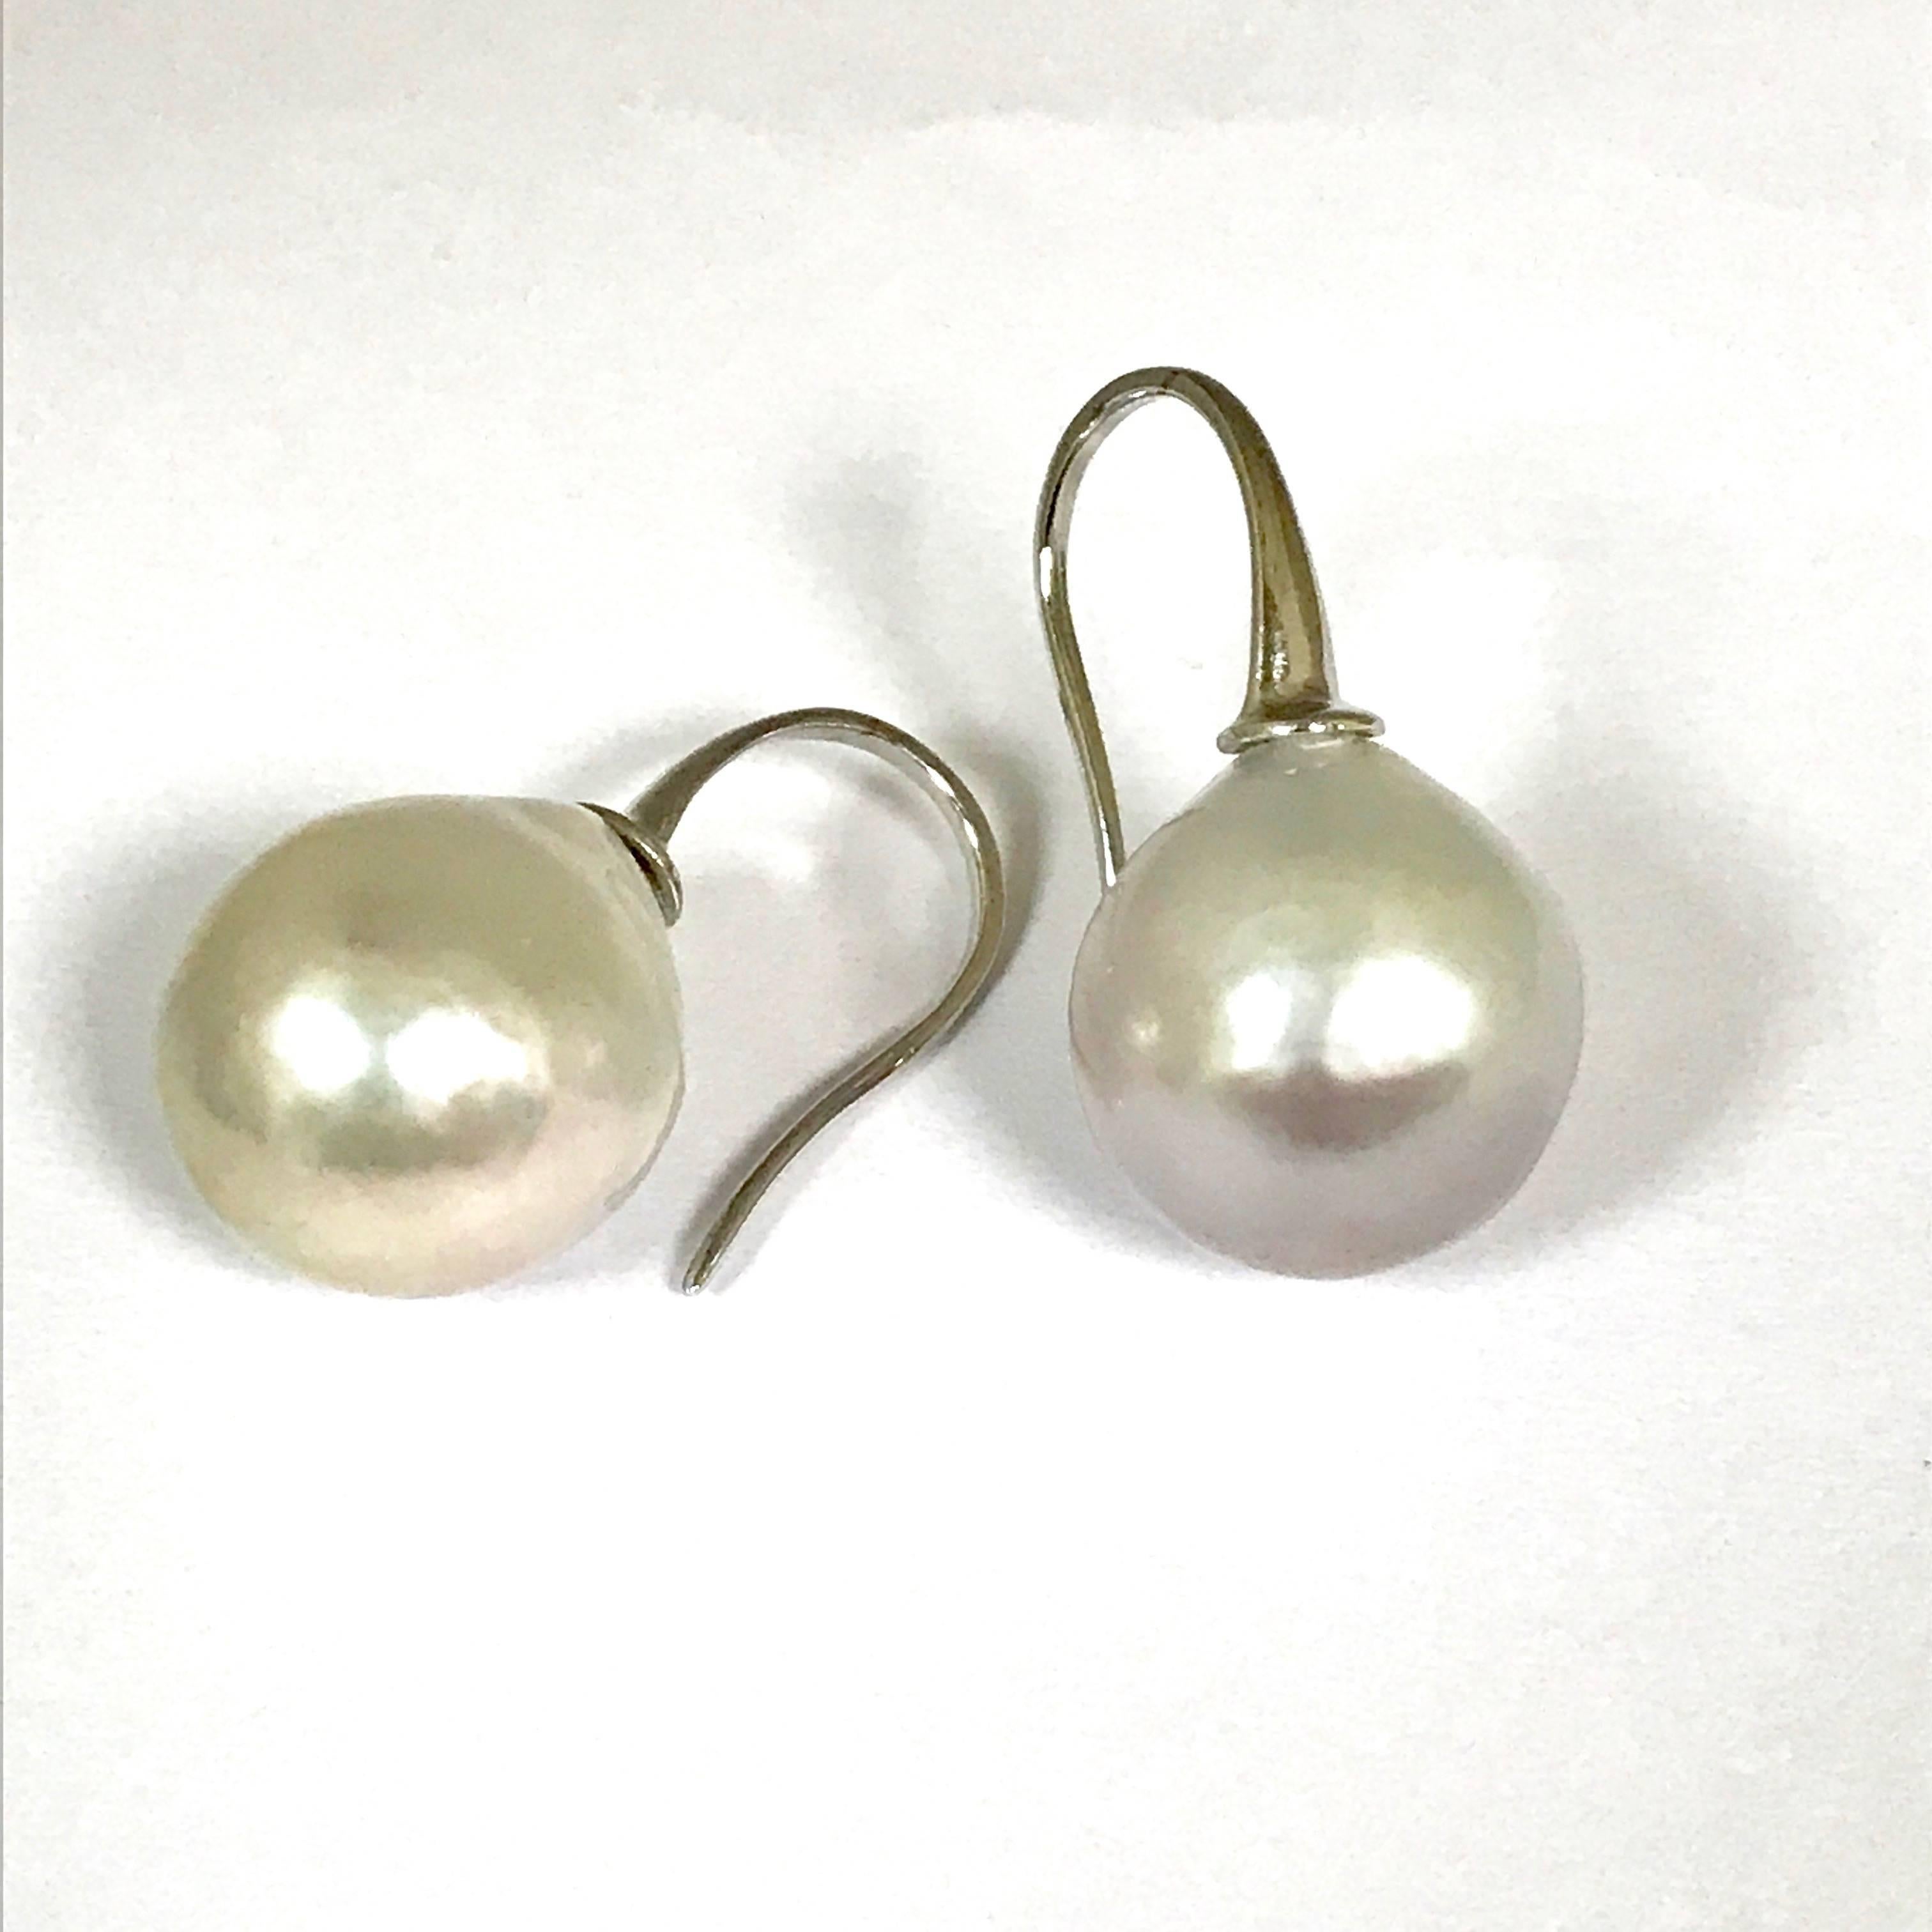 Cultured Pearls and White Gold Drop Earrings.
Cultured Pearls
White Gold 18 Carat
